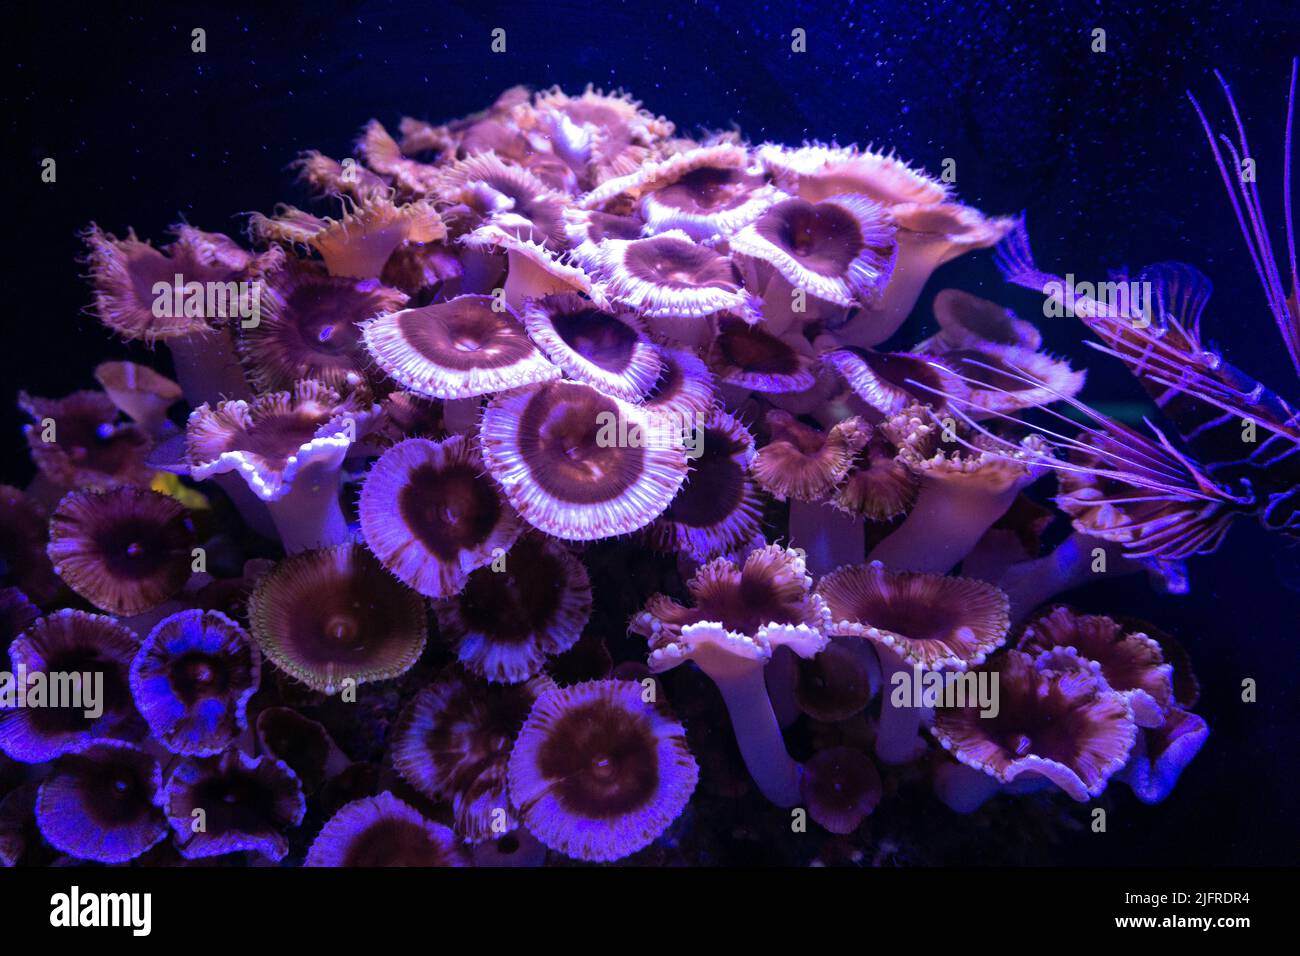 Corals that look like a bouquet of mushrooms and on the right half-body picture of a lionfish Stock Photo